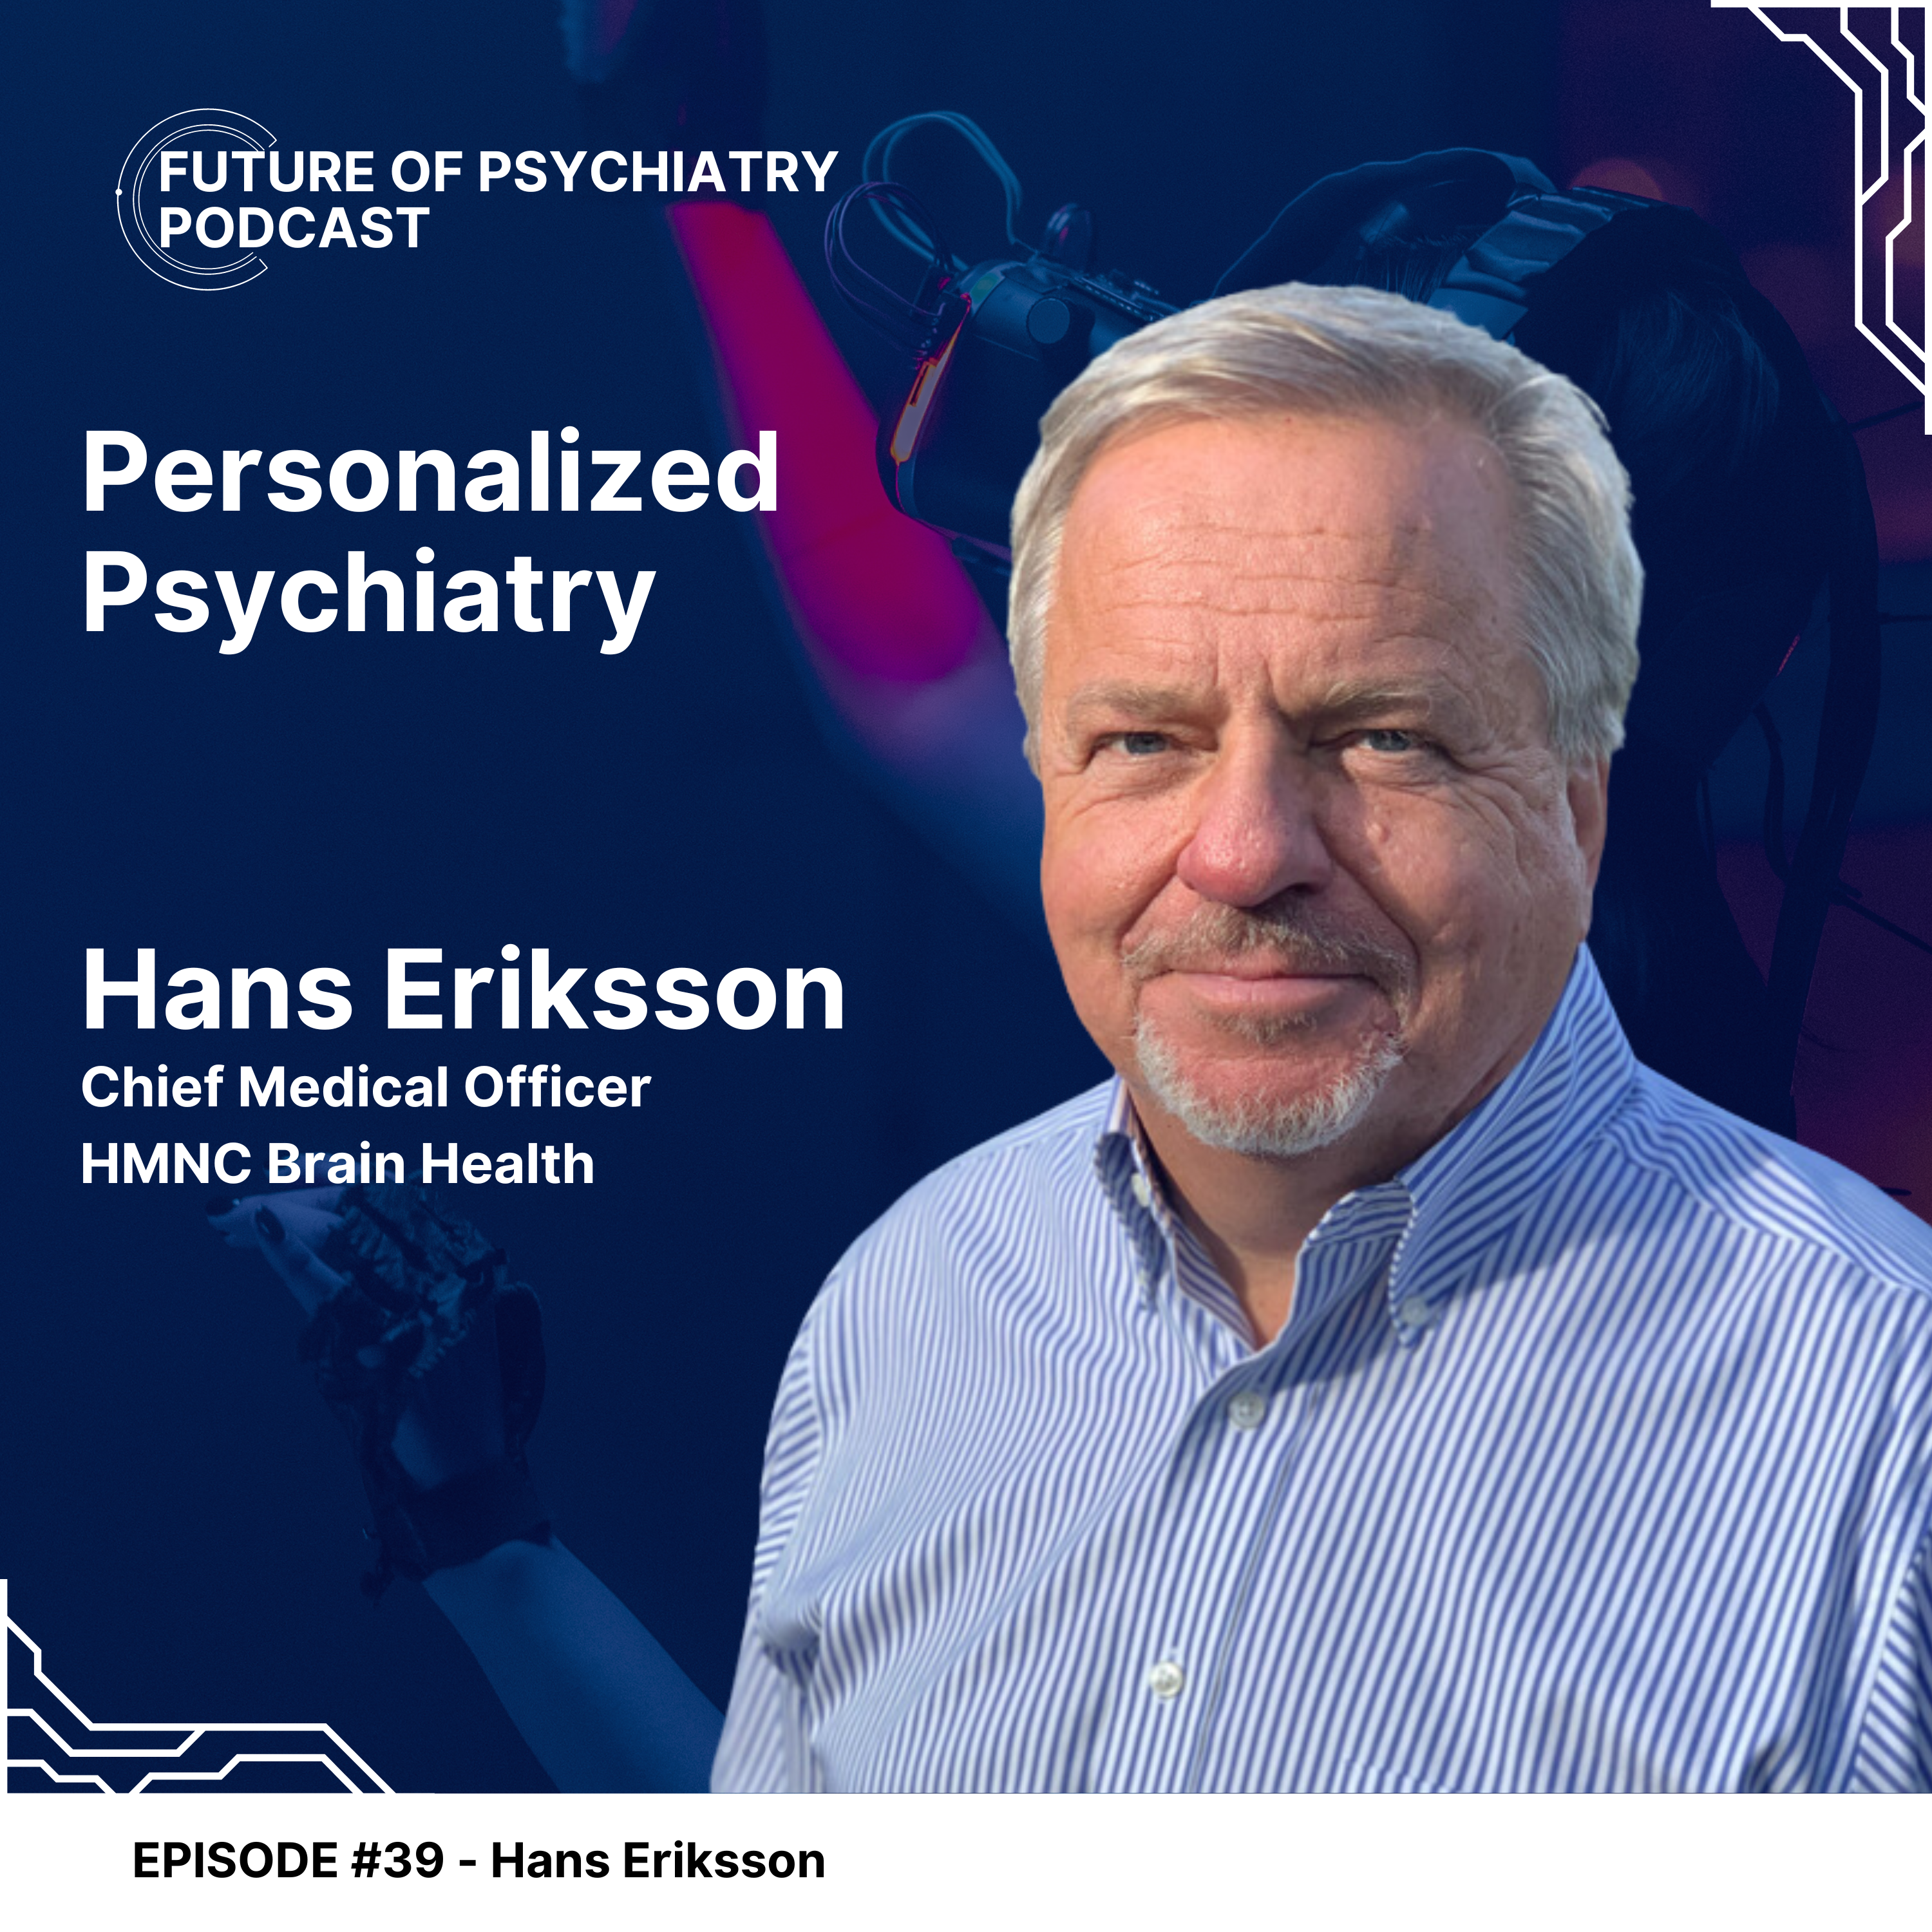 Personalized Psychiatry with Hans Eriksson